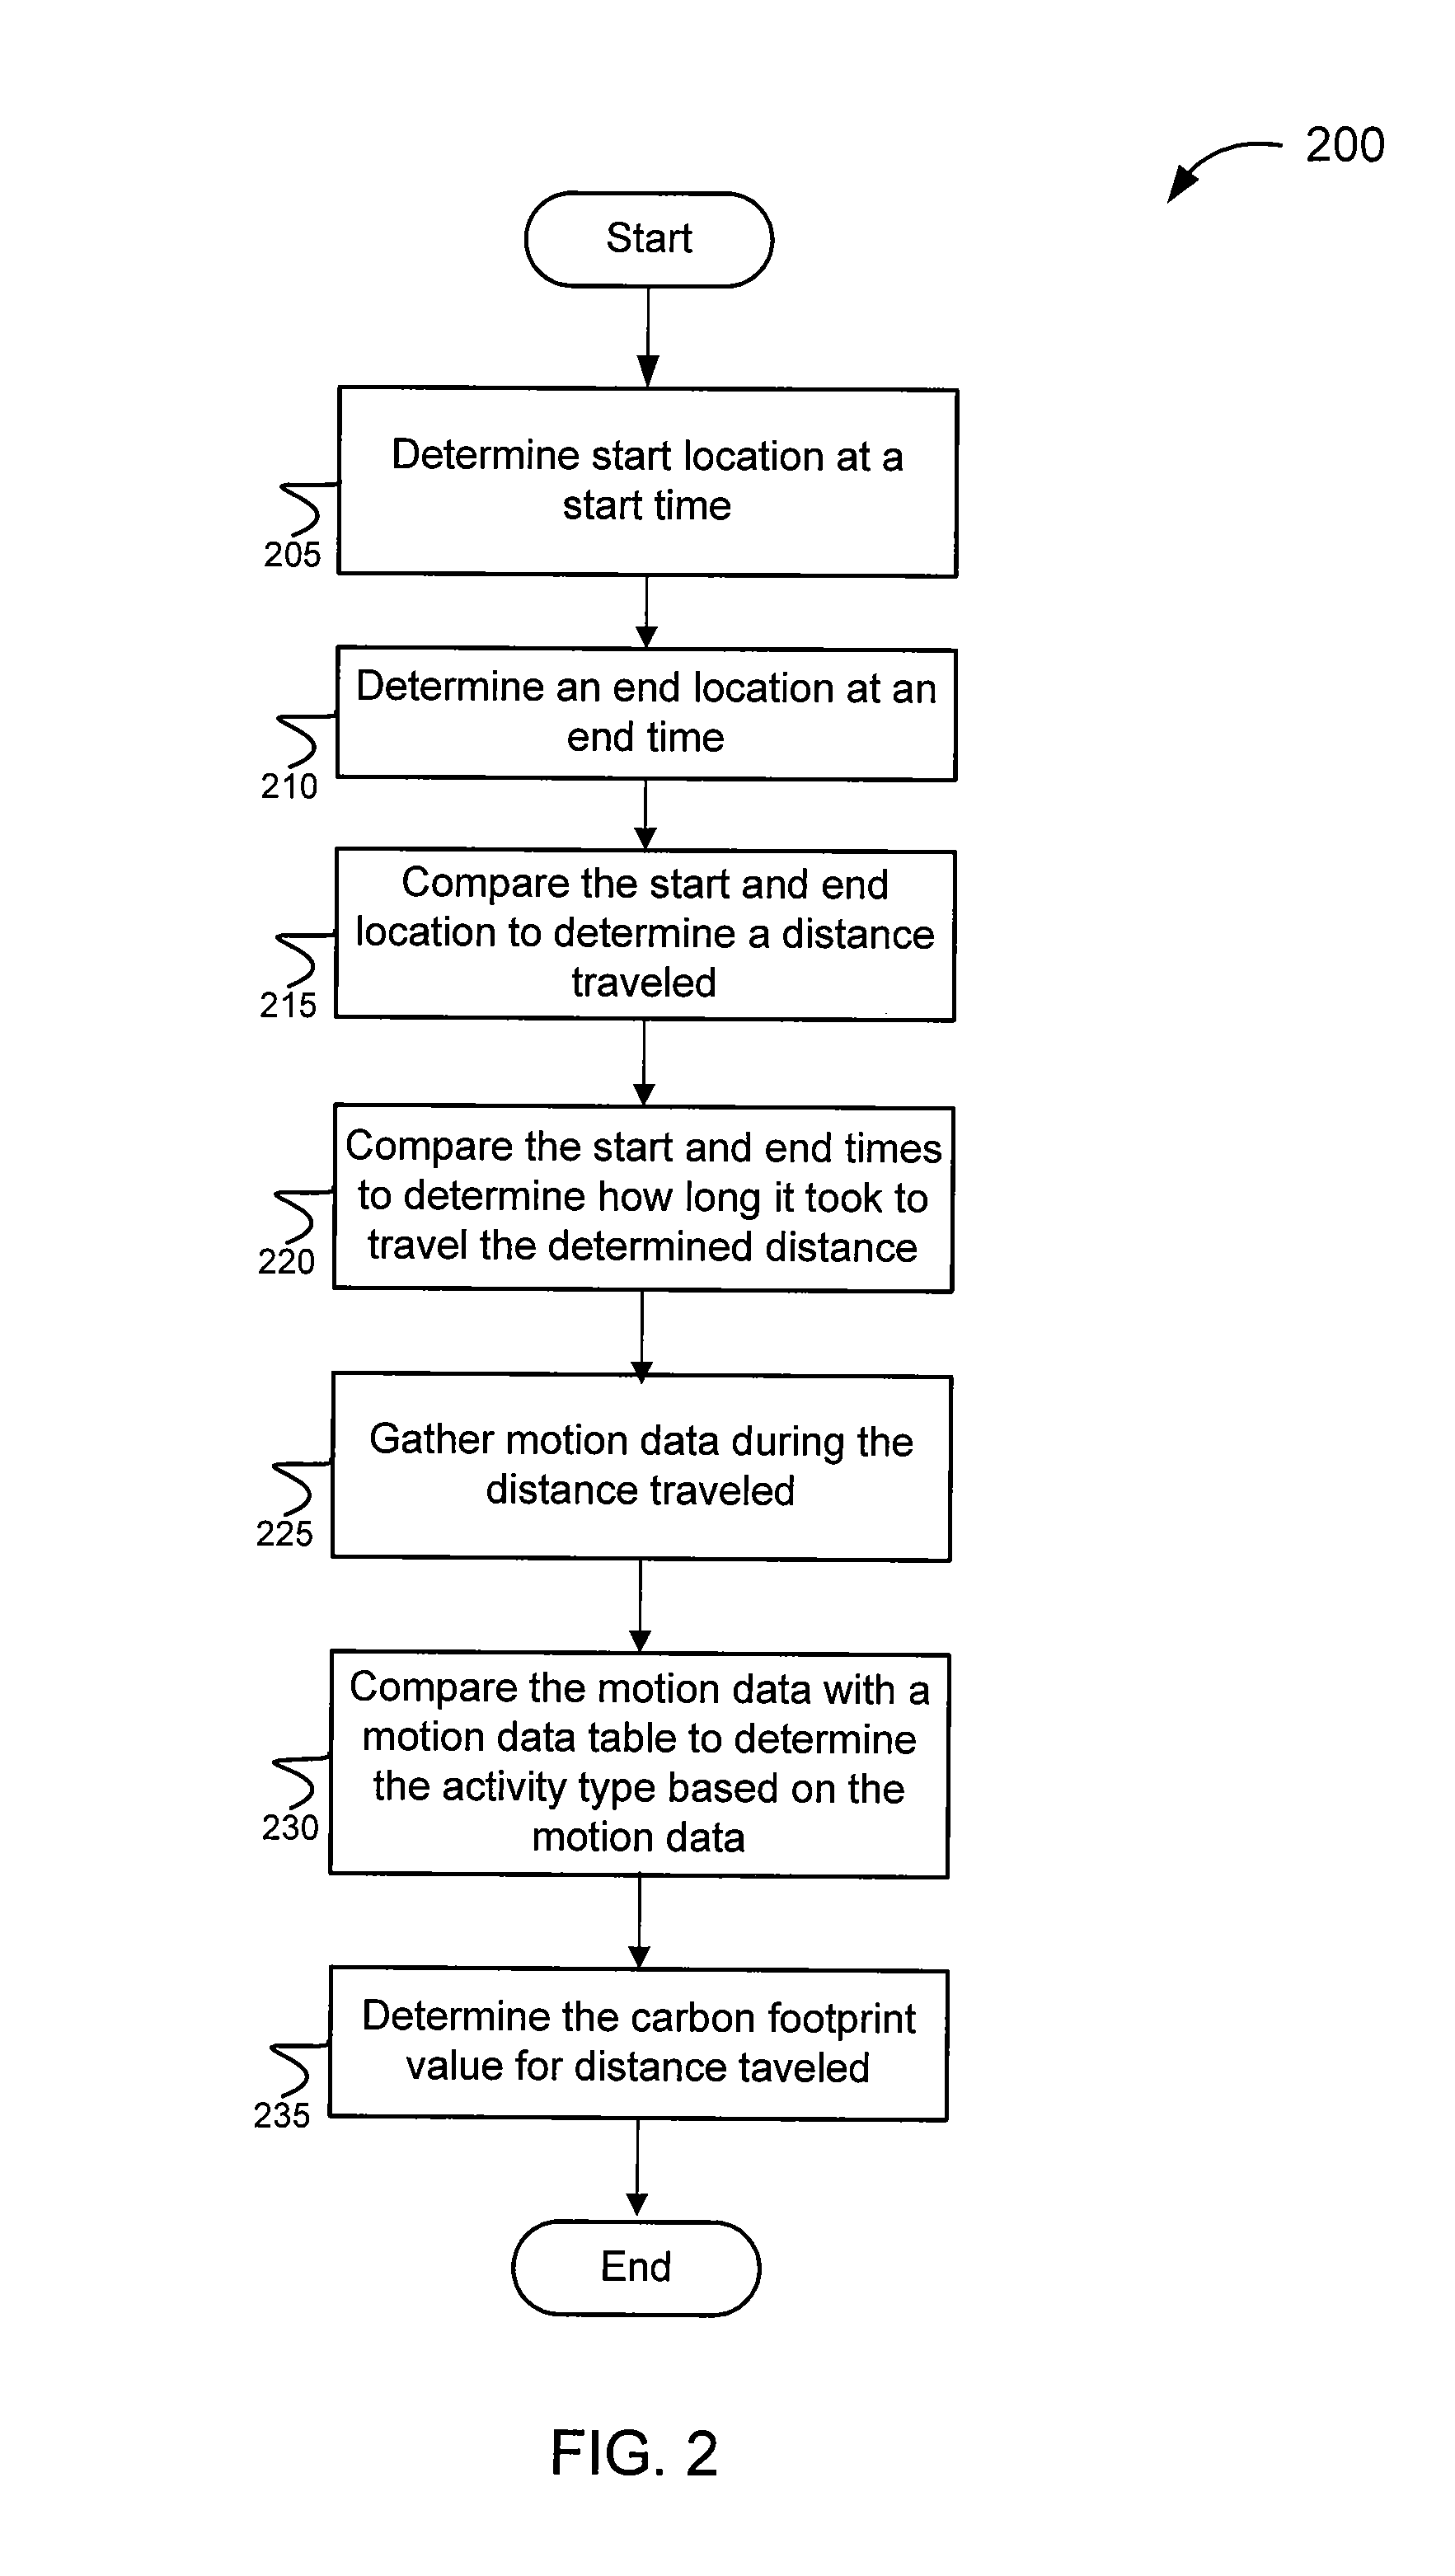 Methods and systems for monitoring and recording carbon footprint data